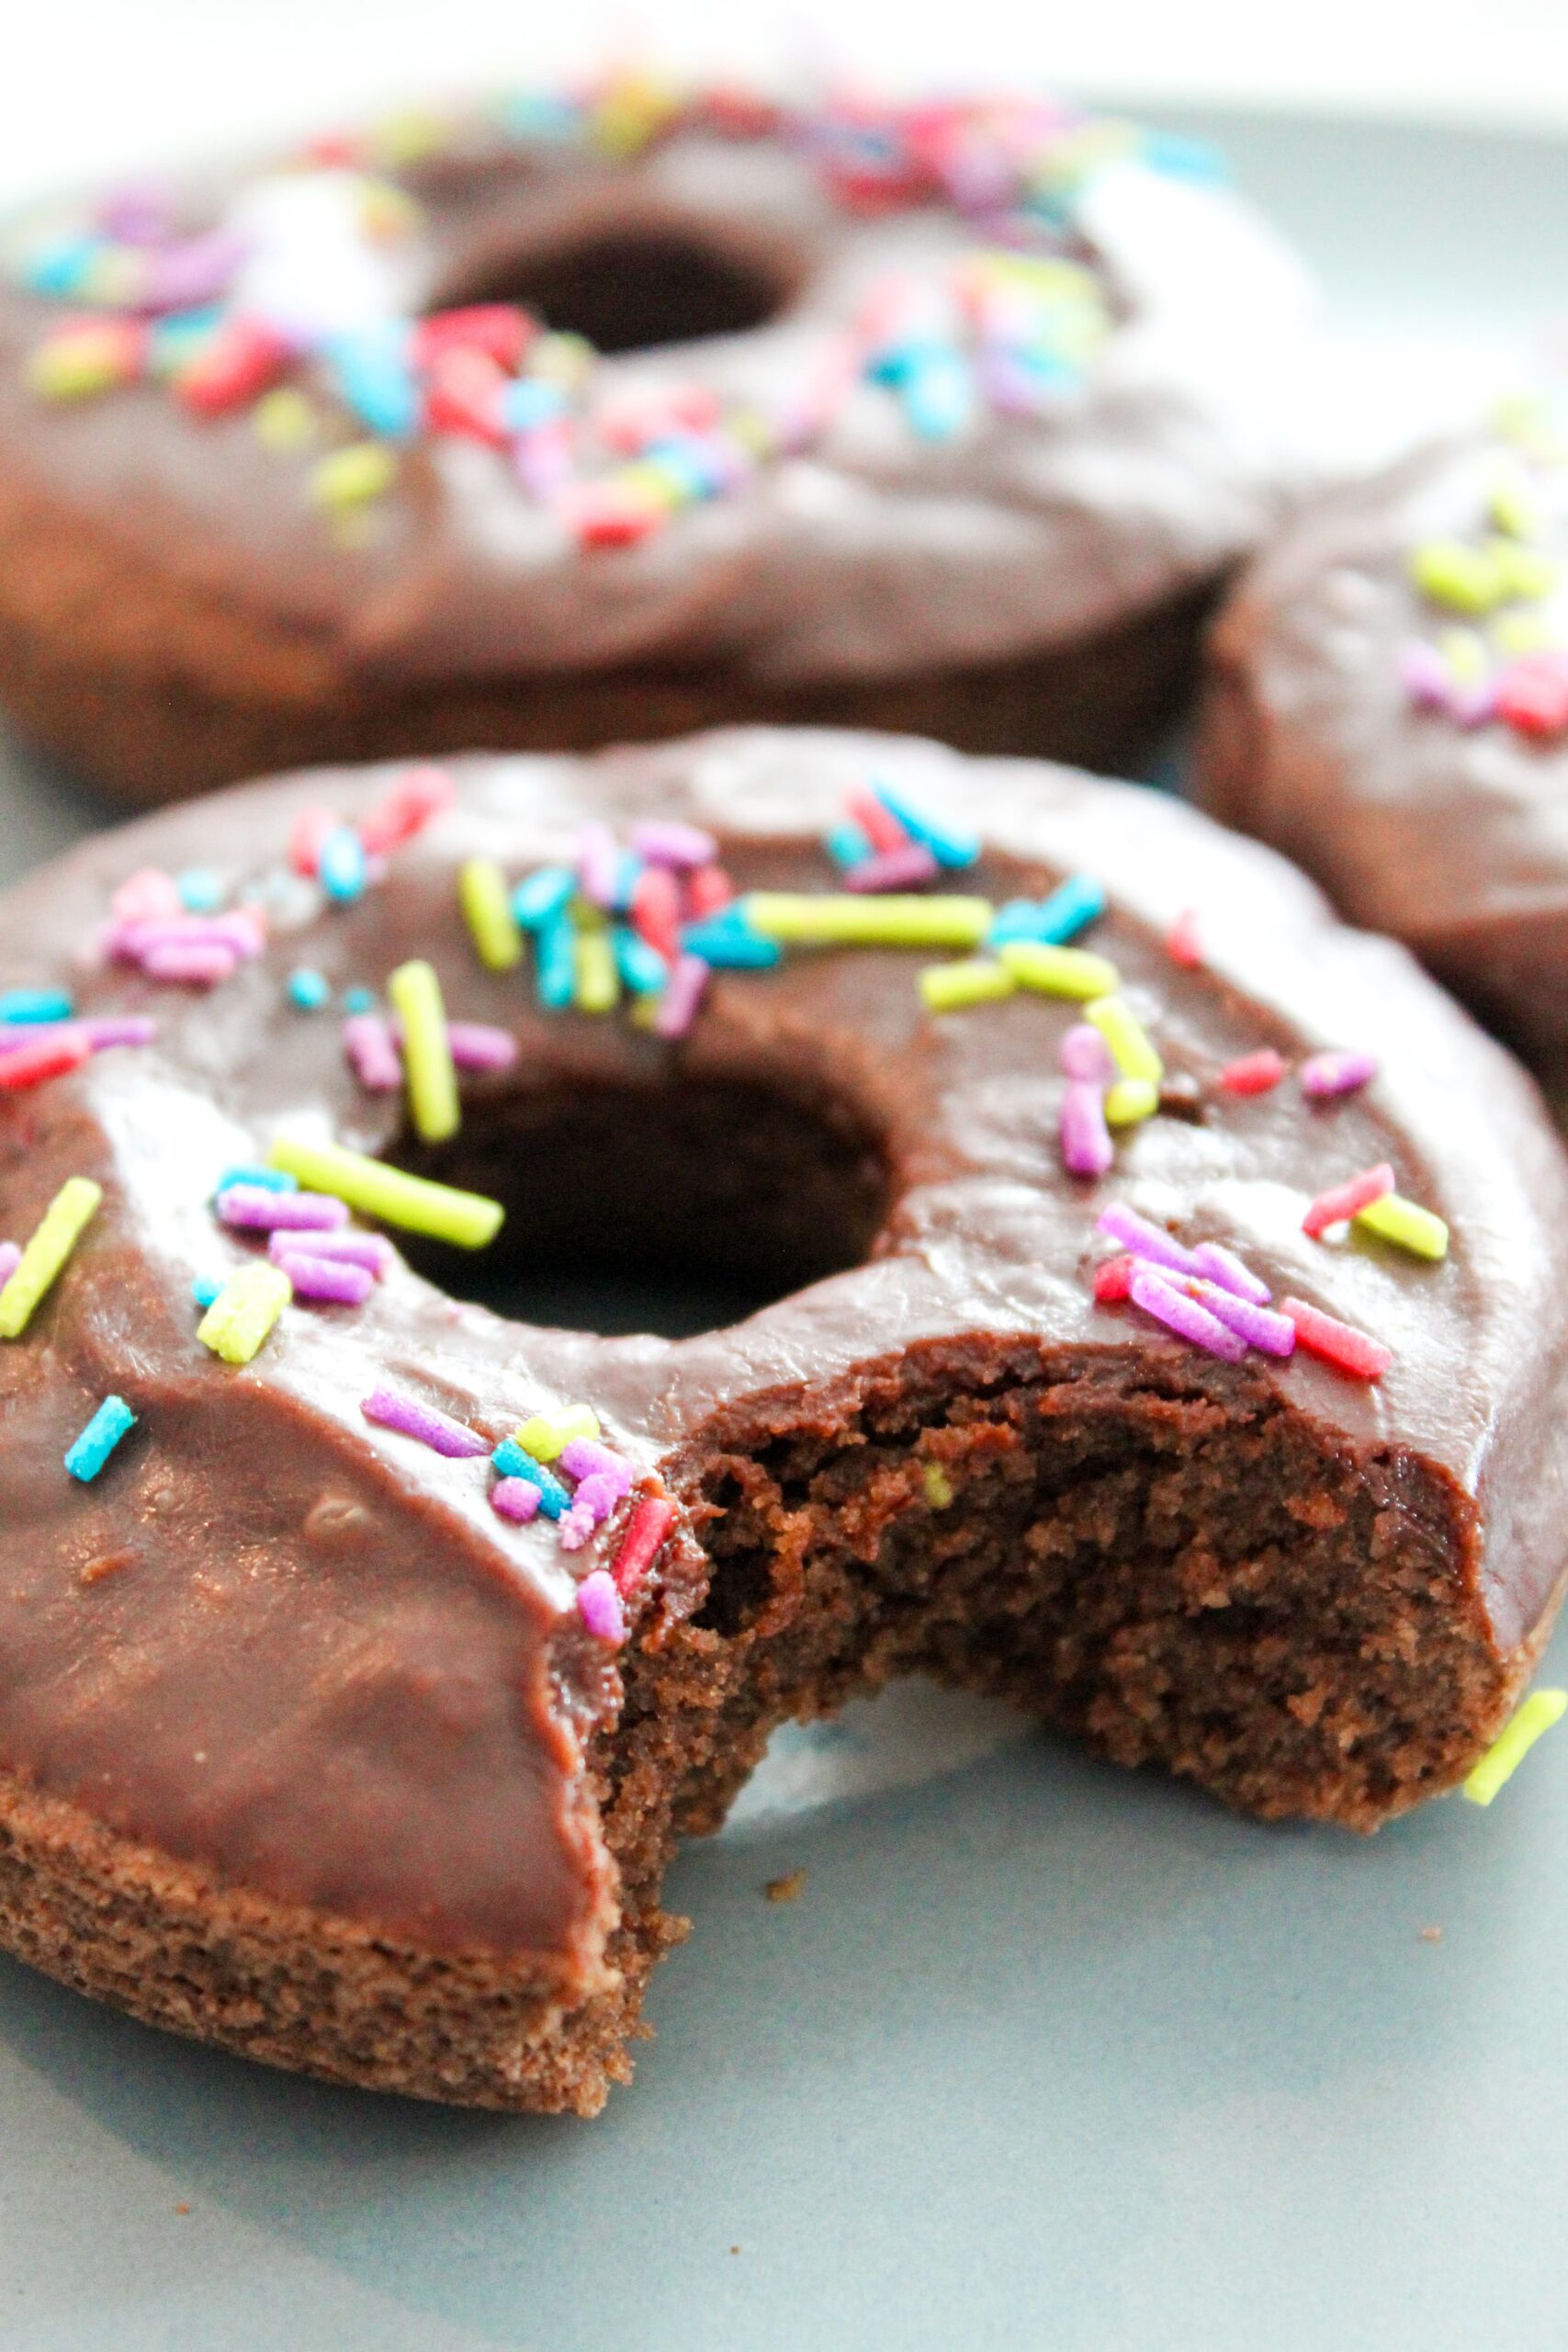 An easy to make Keto Chocolate Donut recipe.  Perfectly tender, with chocolate fudge icing - and even sprinkles! Keto Chocolate Donuts are delicious fresh out of the oven with a cup of coffee, or stored in the fridge and then reheated for 10 seconds in the microwave.